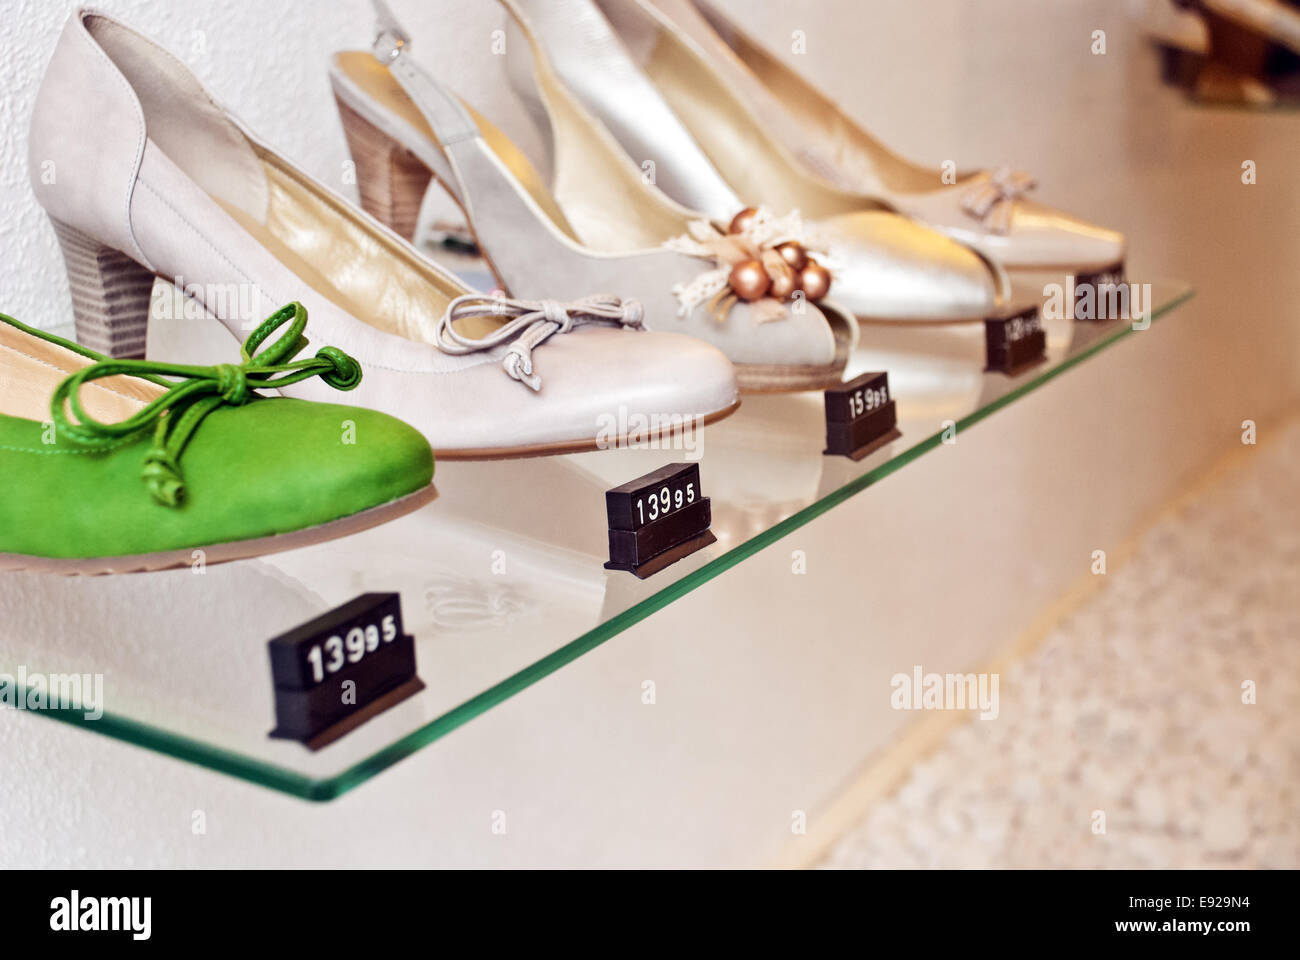 Shoes in the showcase Stock Photo